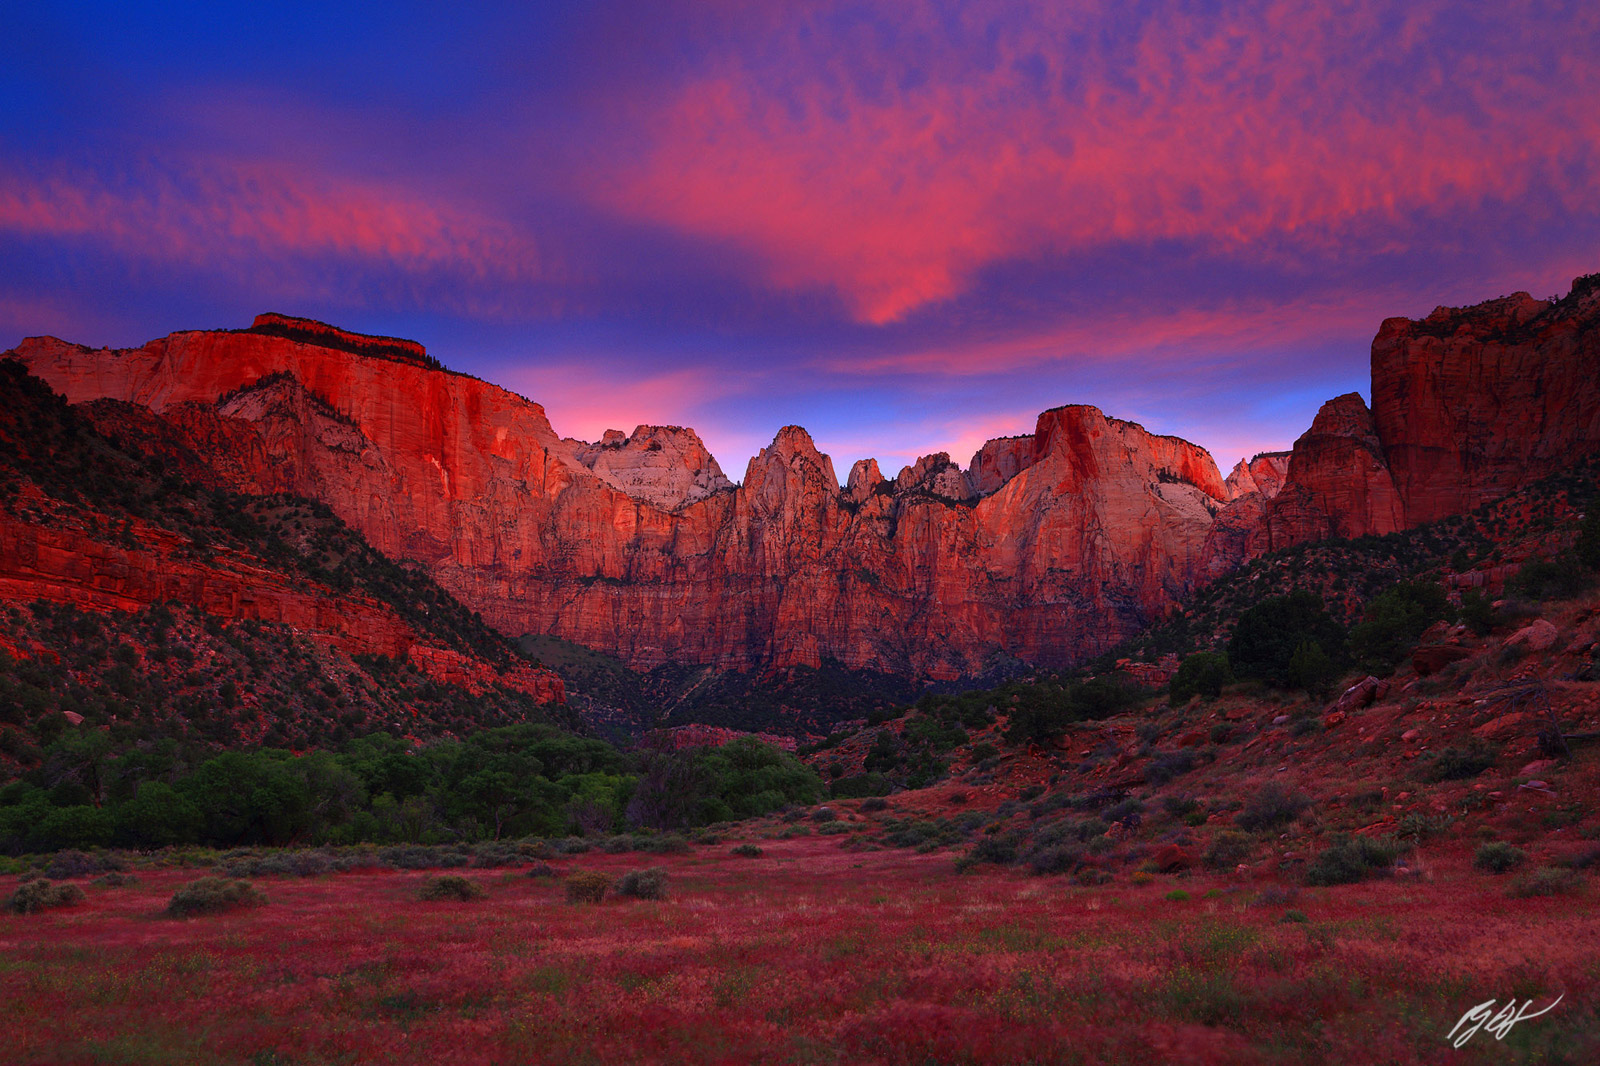 Sunrise Light on the Towers of the Virgin in Zion National Park in Utah